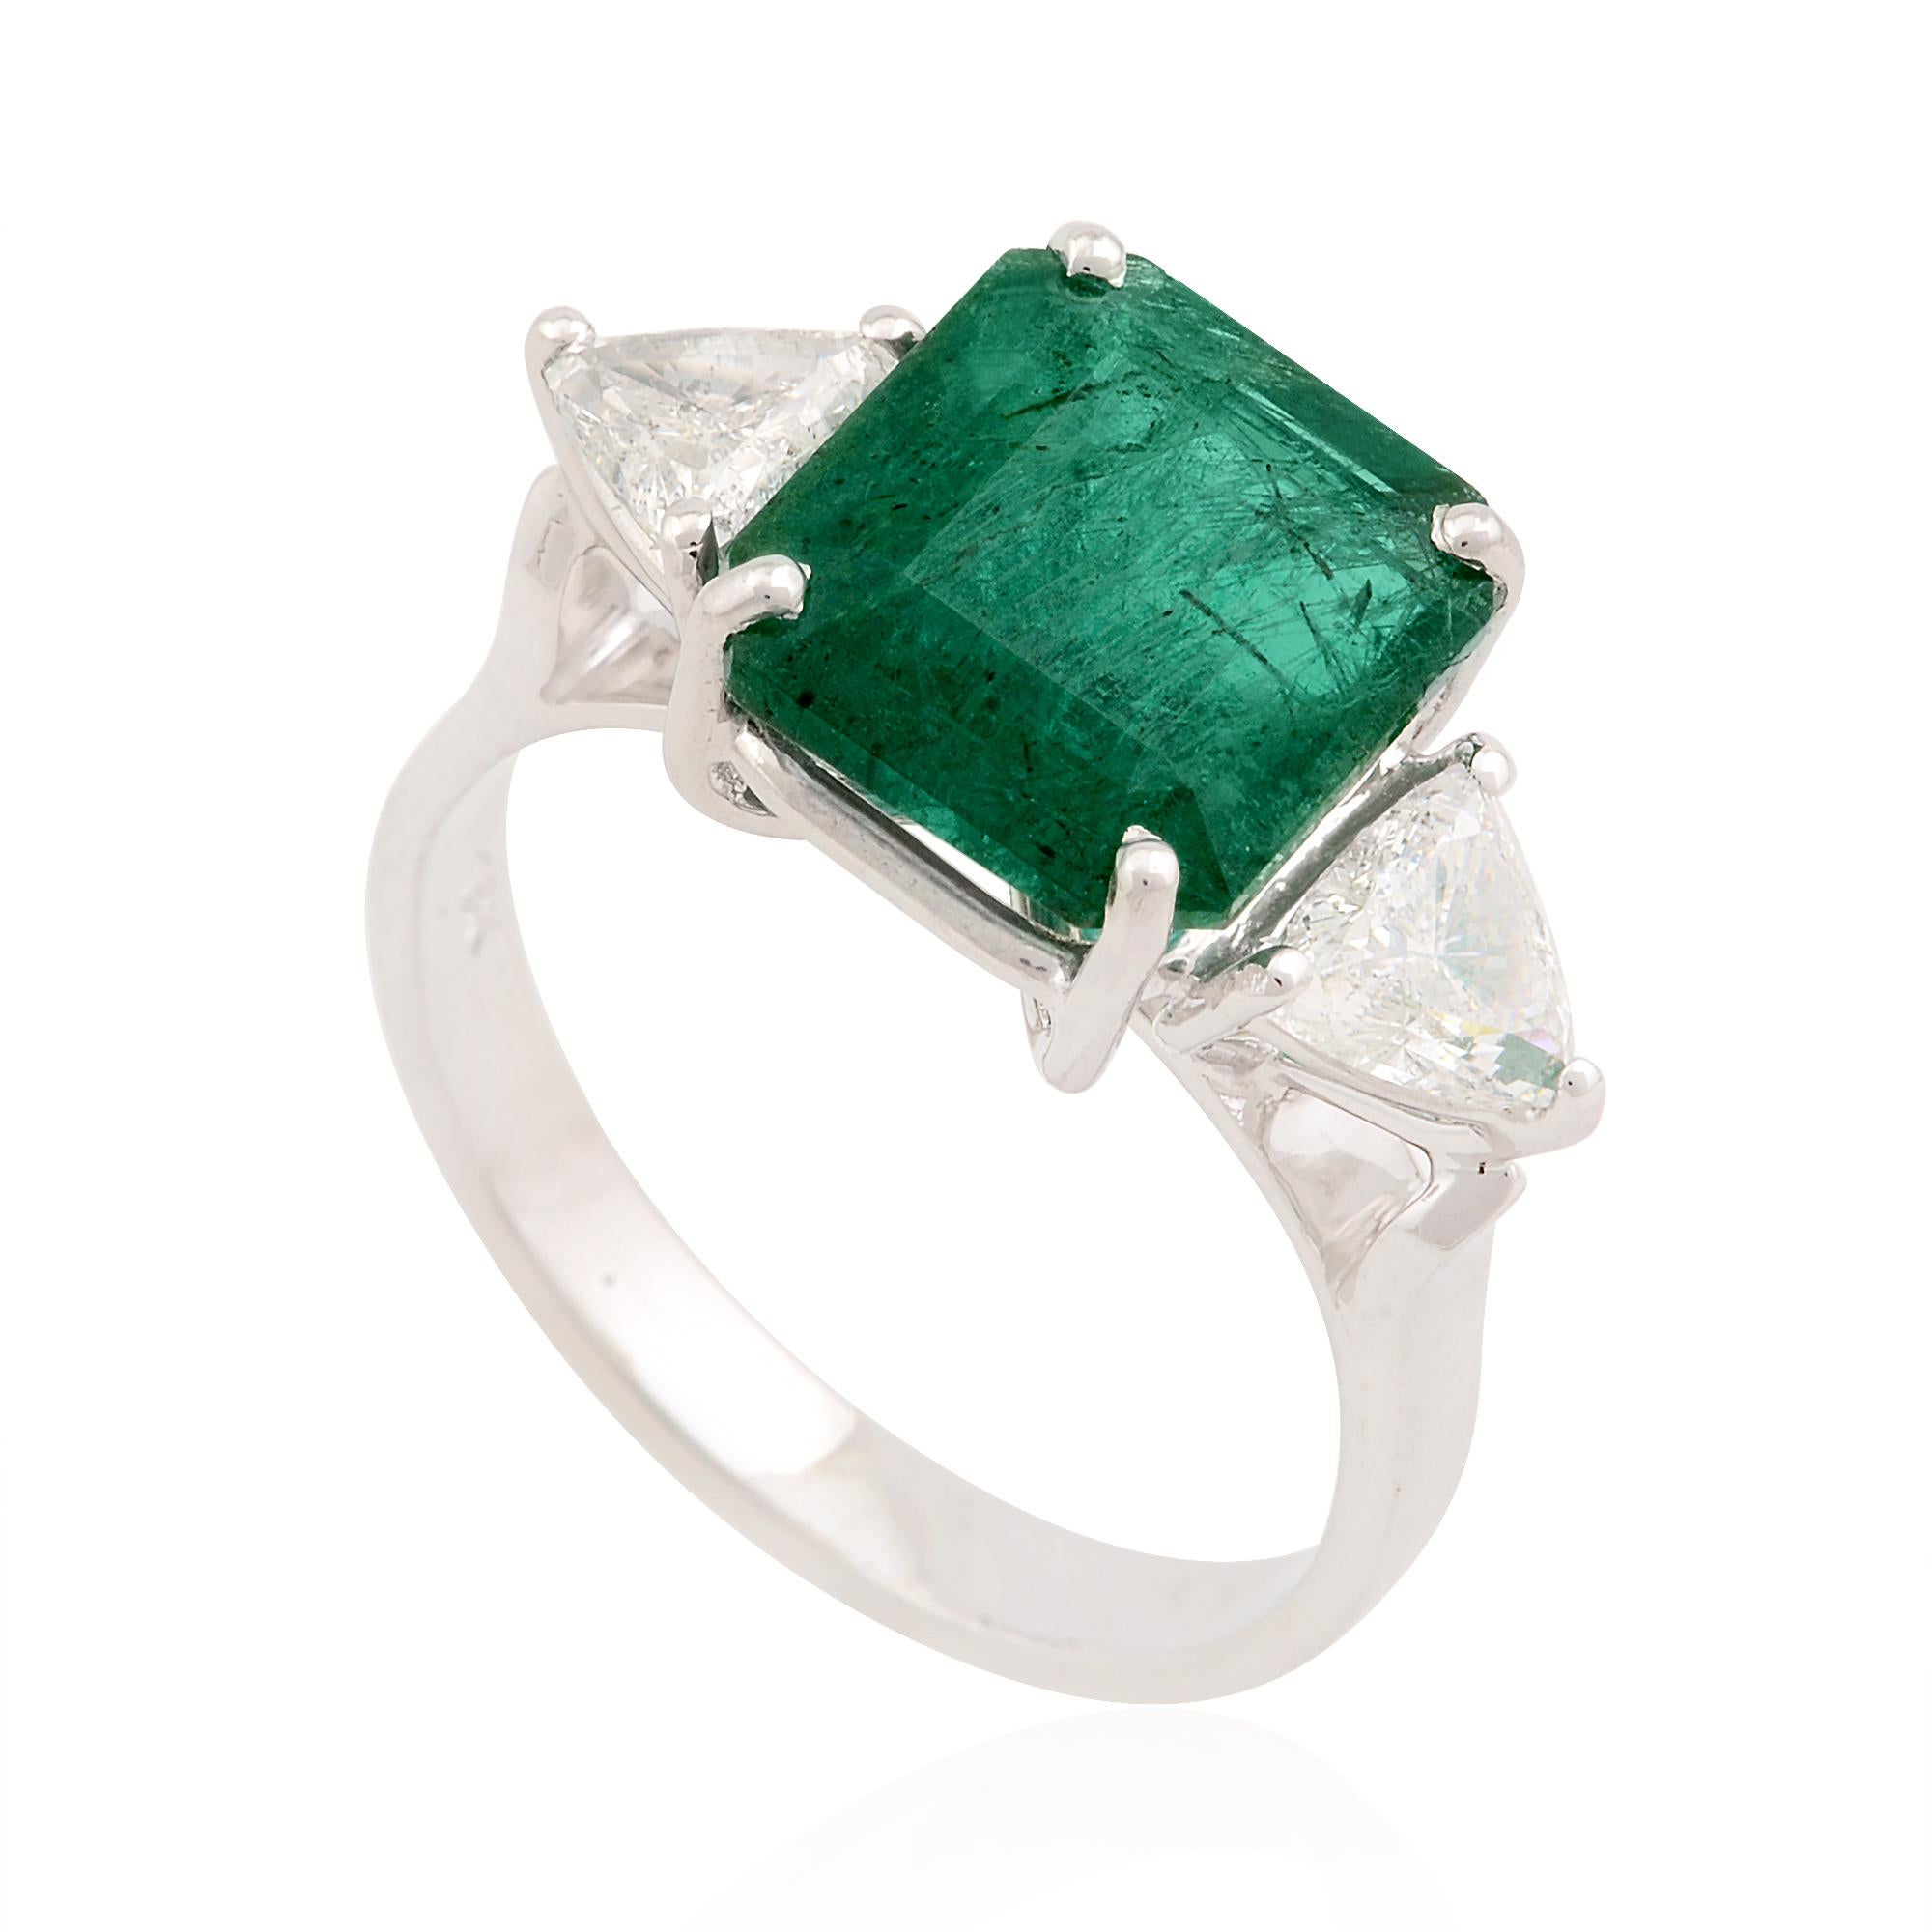 Modern Zambian Emerald Gemstone Cocktail Ring Pear Diamond Solid 18k White Gold Jewelry For Sale